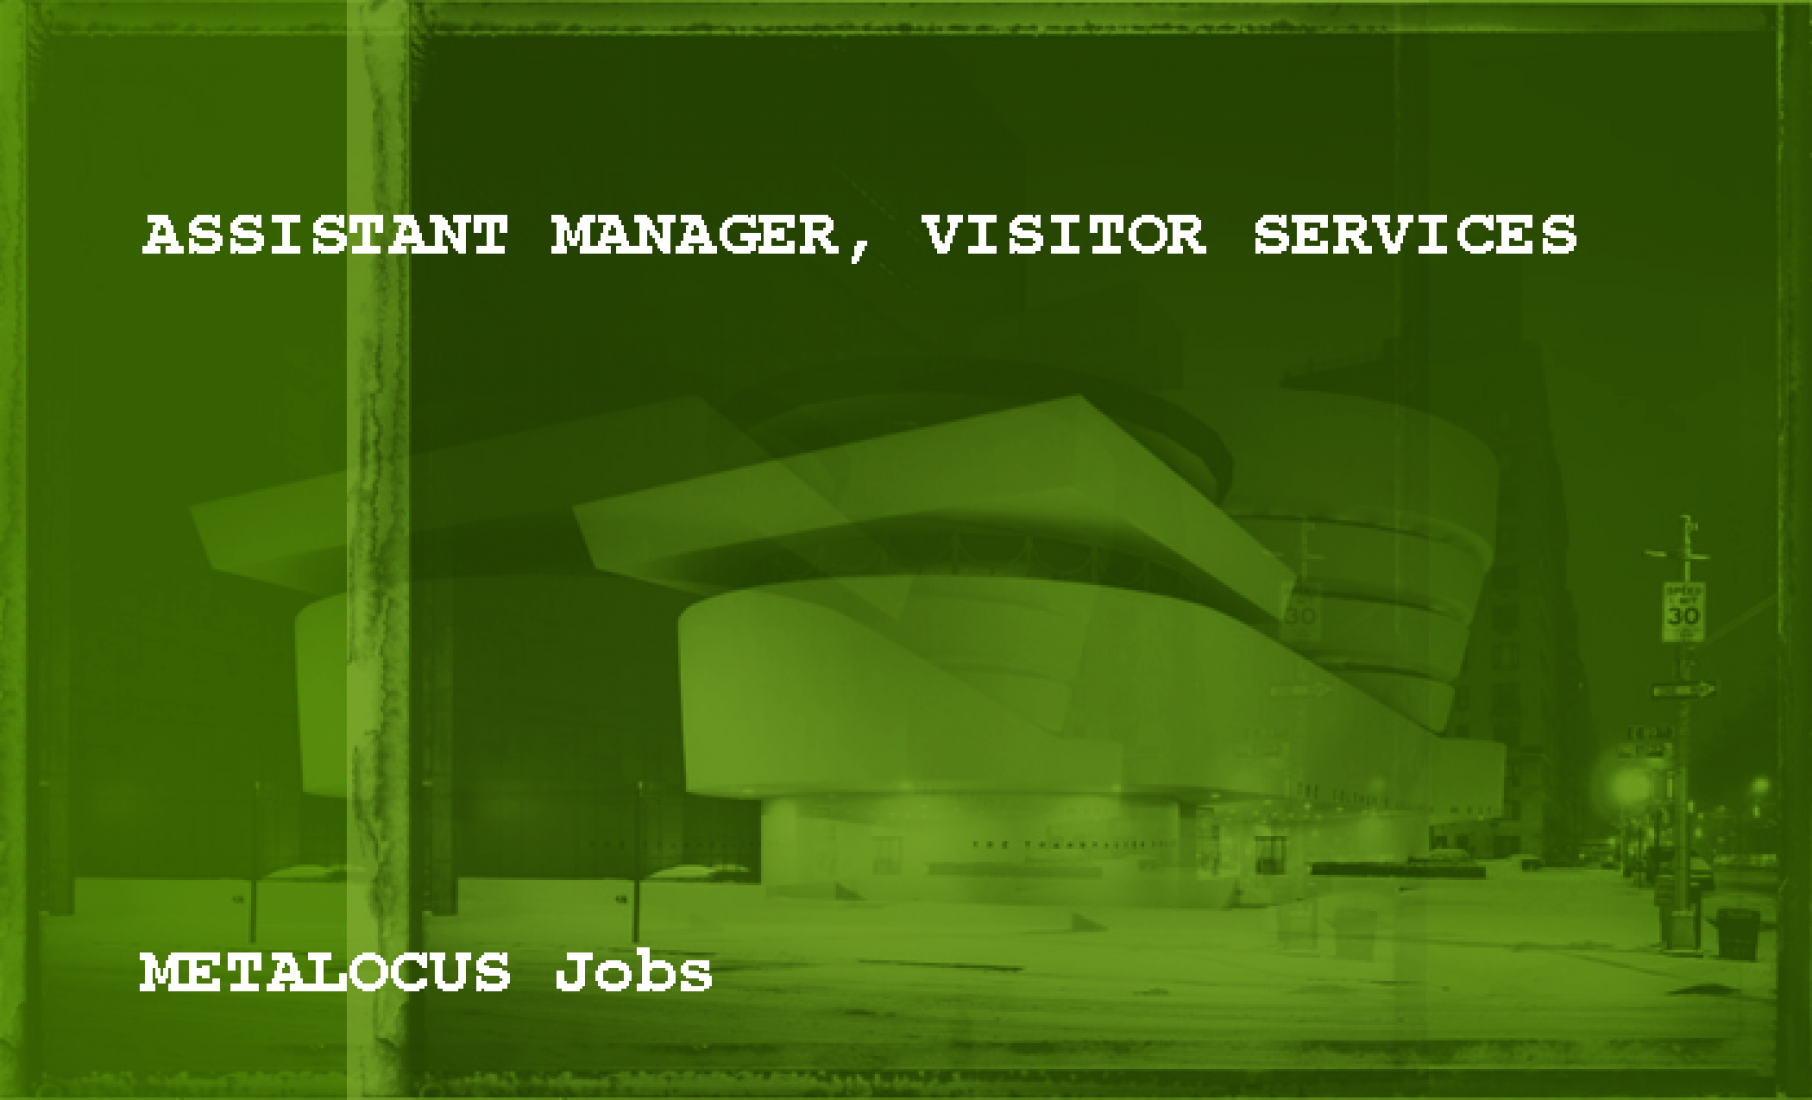 ASSISTANT MANAGER, VISITOR SERVICES